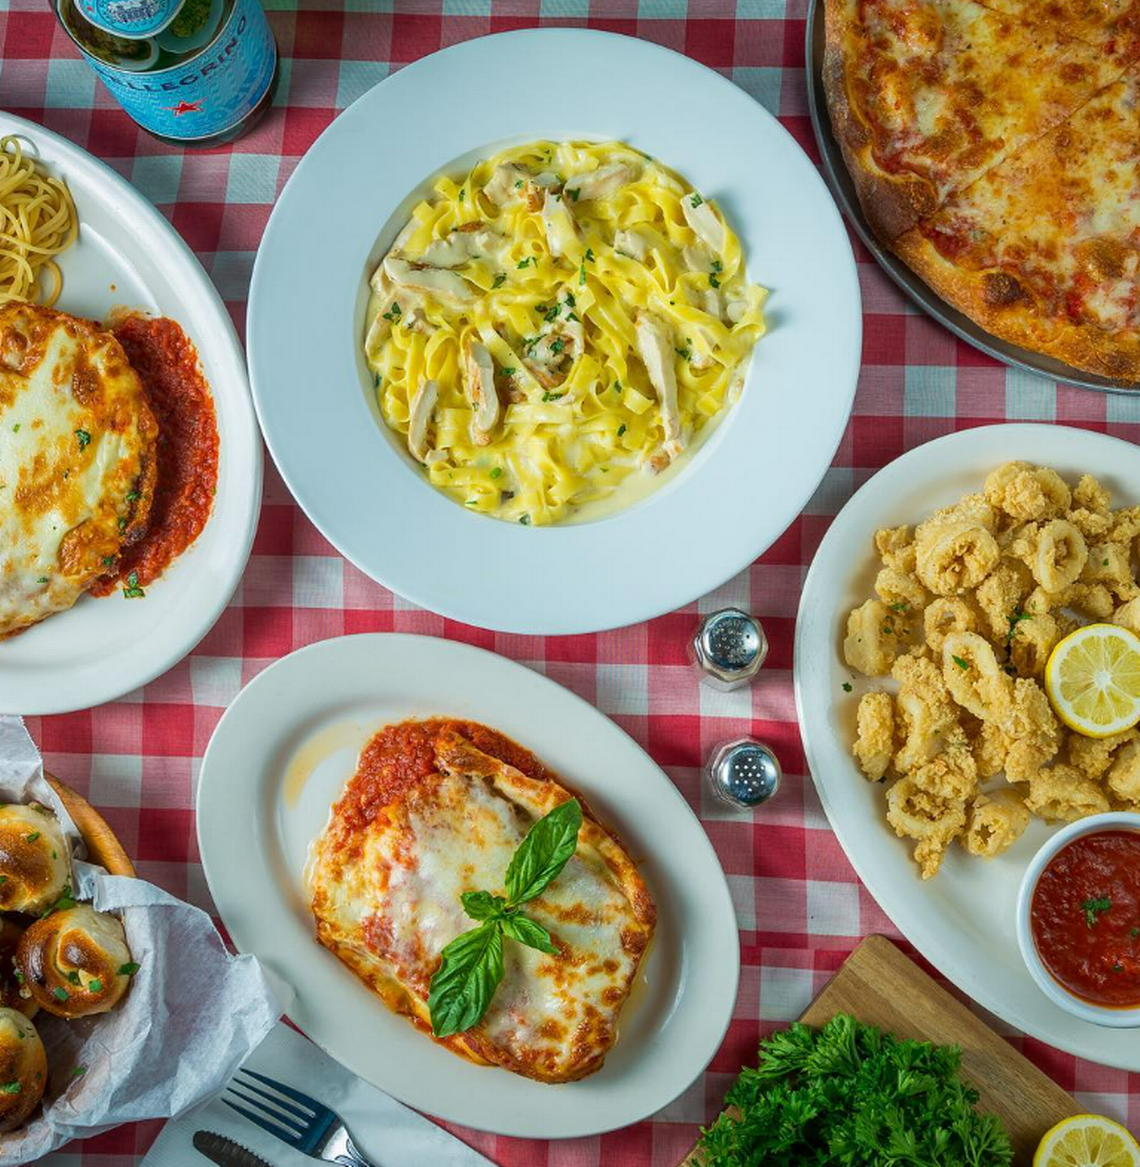 Di Piazza Italian restaurant offers in Hialeah the opportunity to eat the best Italian recipes, with Sicilian tradition